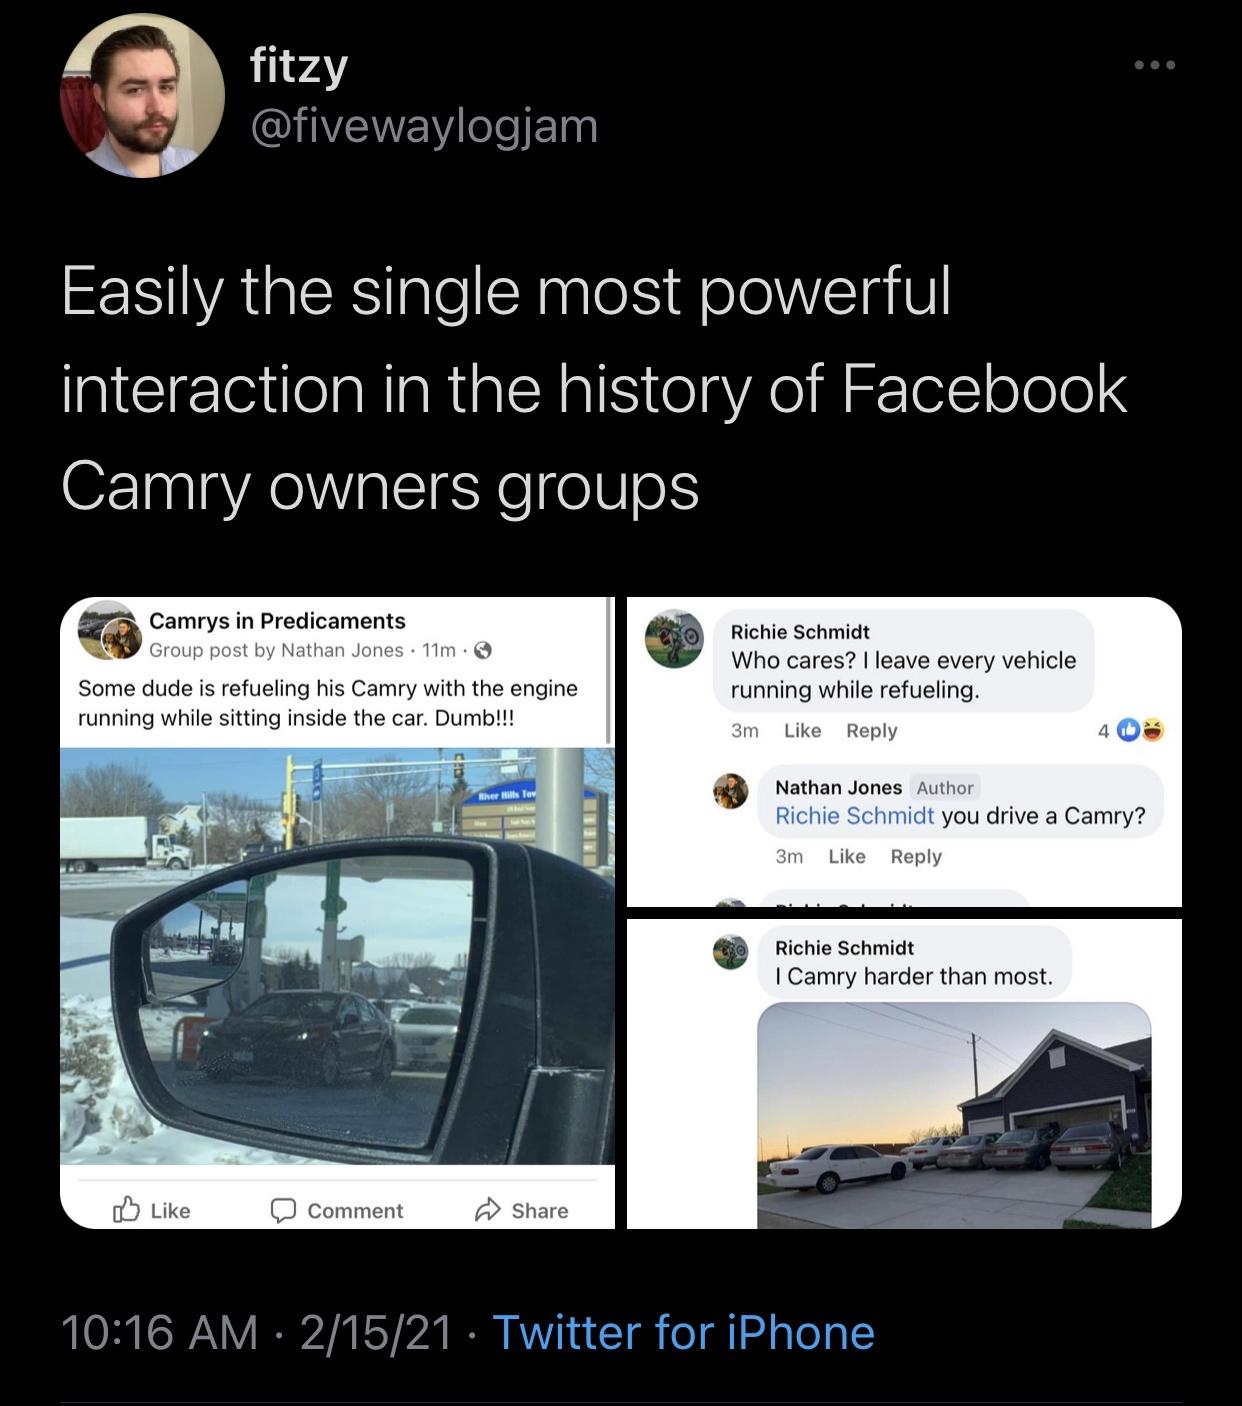 multimedia - fitzy Easily the single most powerful interaction in the history of Facebook Camry owners groups Camrys in Predicaments Group post by Nathan Jones. 11m . Some dude is refueling his Camry with the engine running while sitting inside the car. D